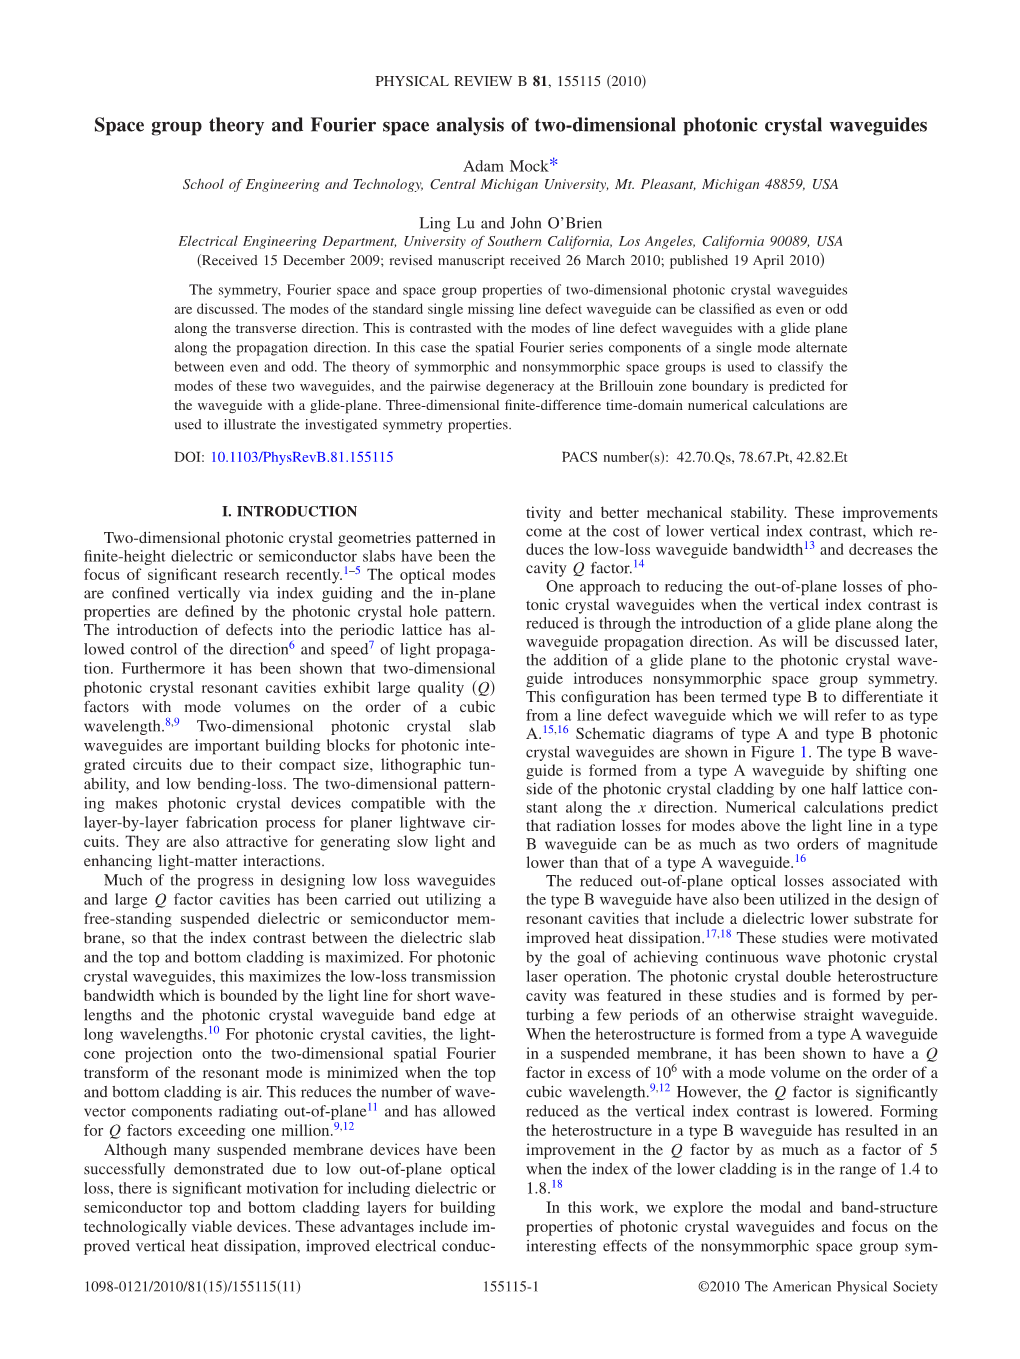 Space Group Theory and Fourier Space Analysis of Two-Dimensional Photonic Crystal Waveguides